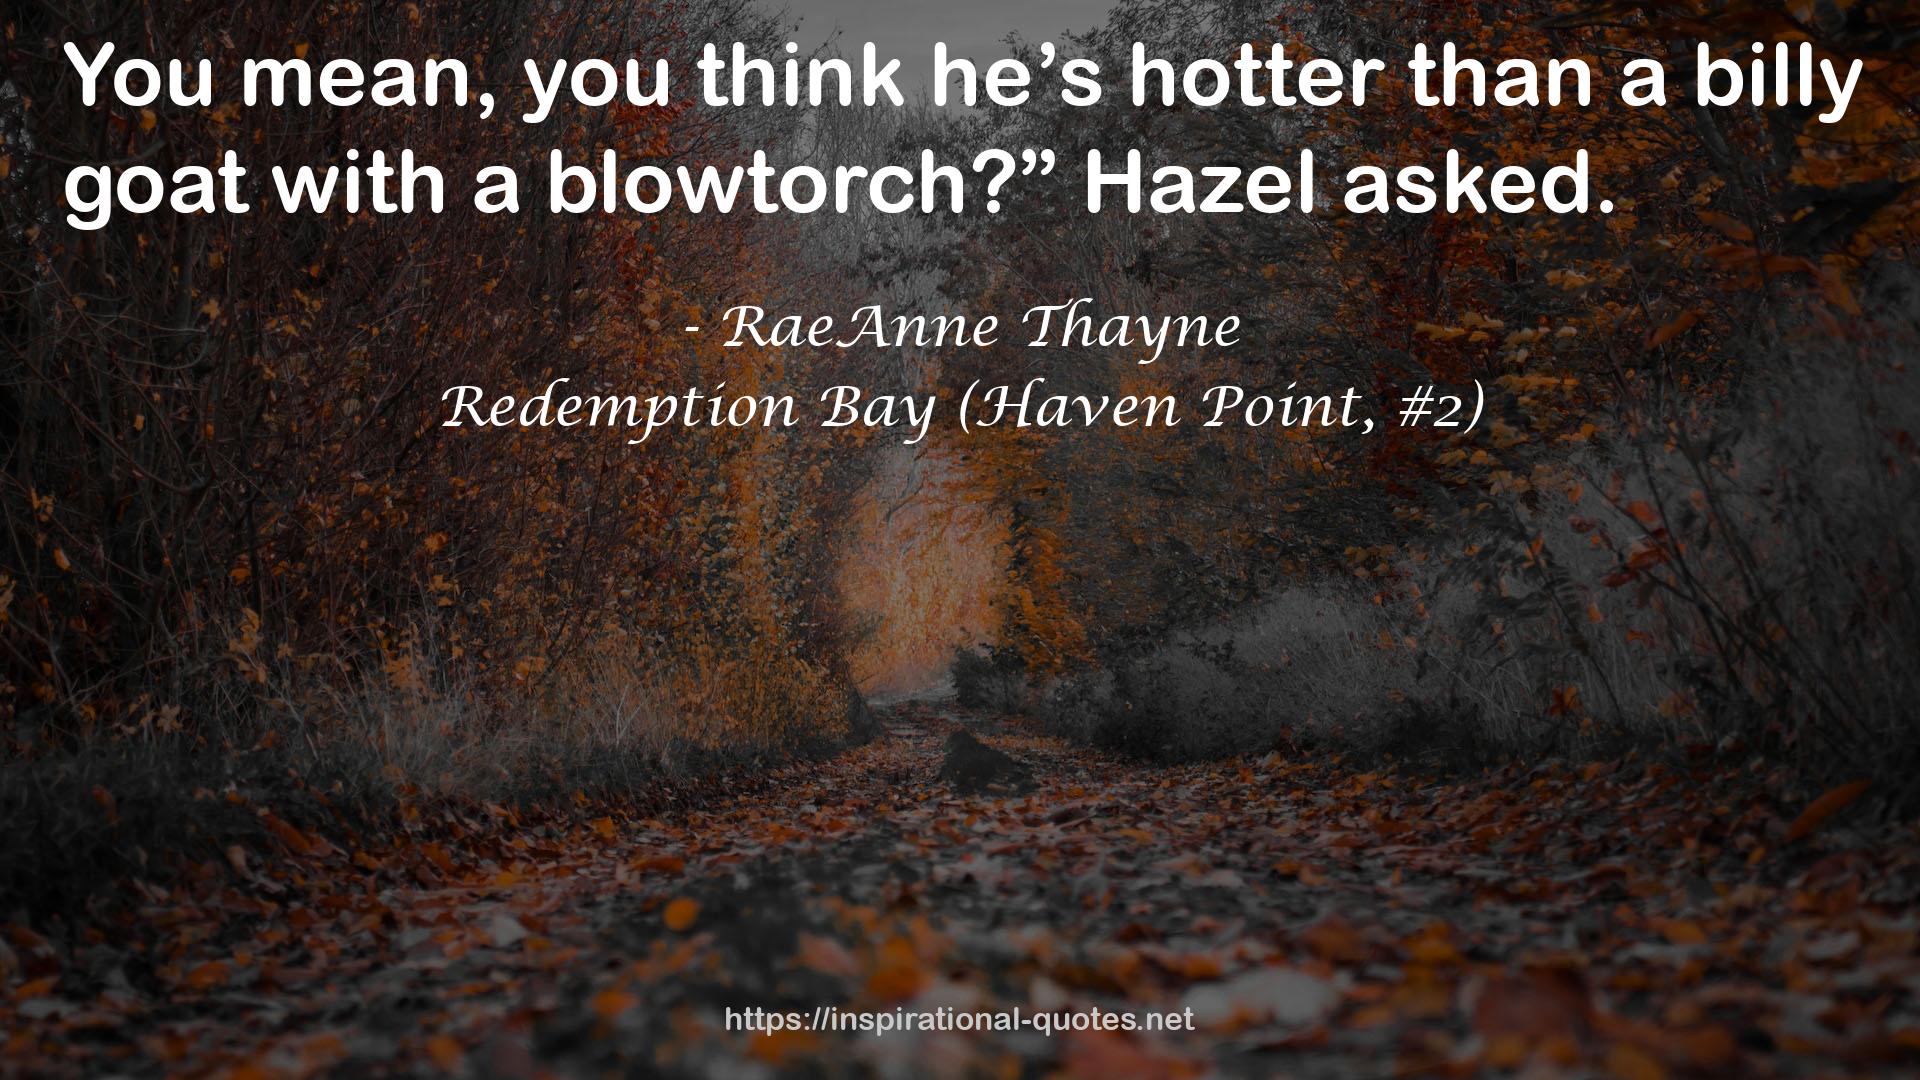 Redemption Bay (Haven Point, #2) QUOTES